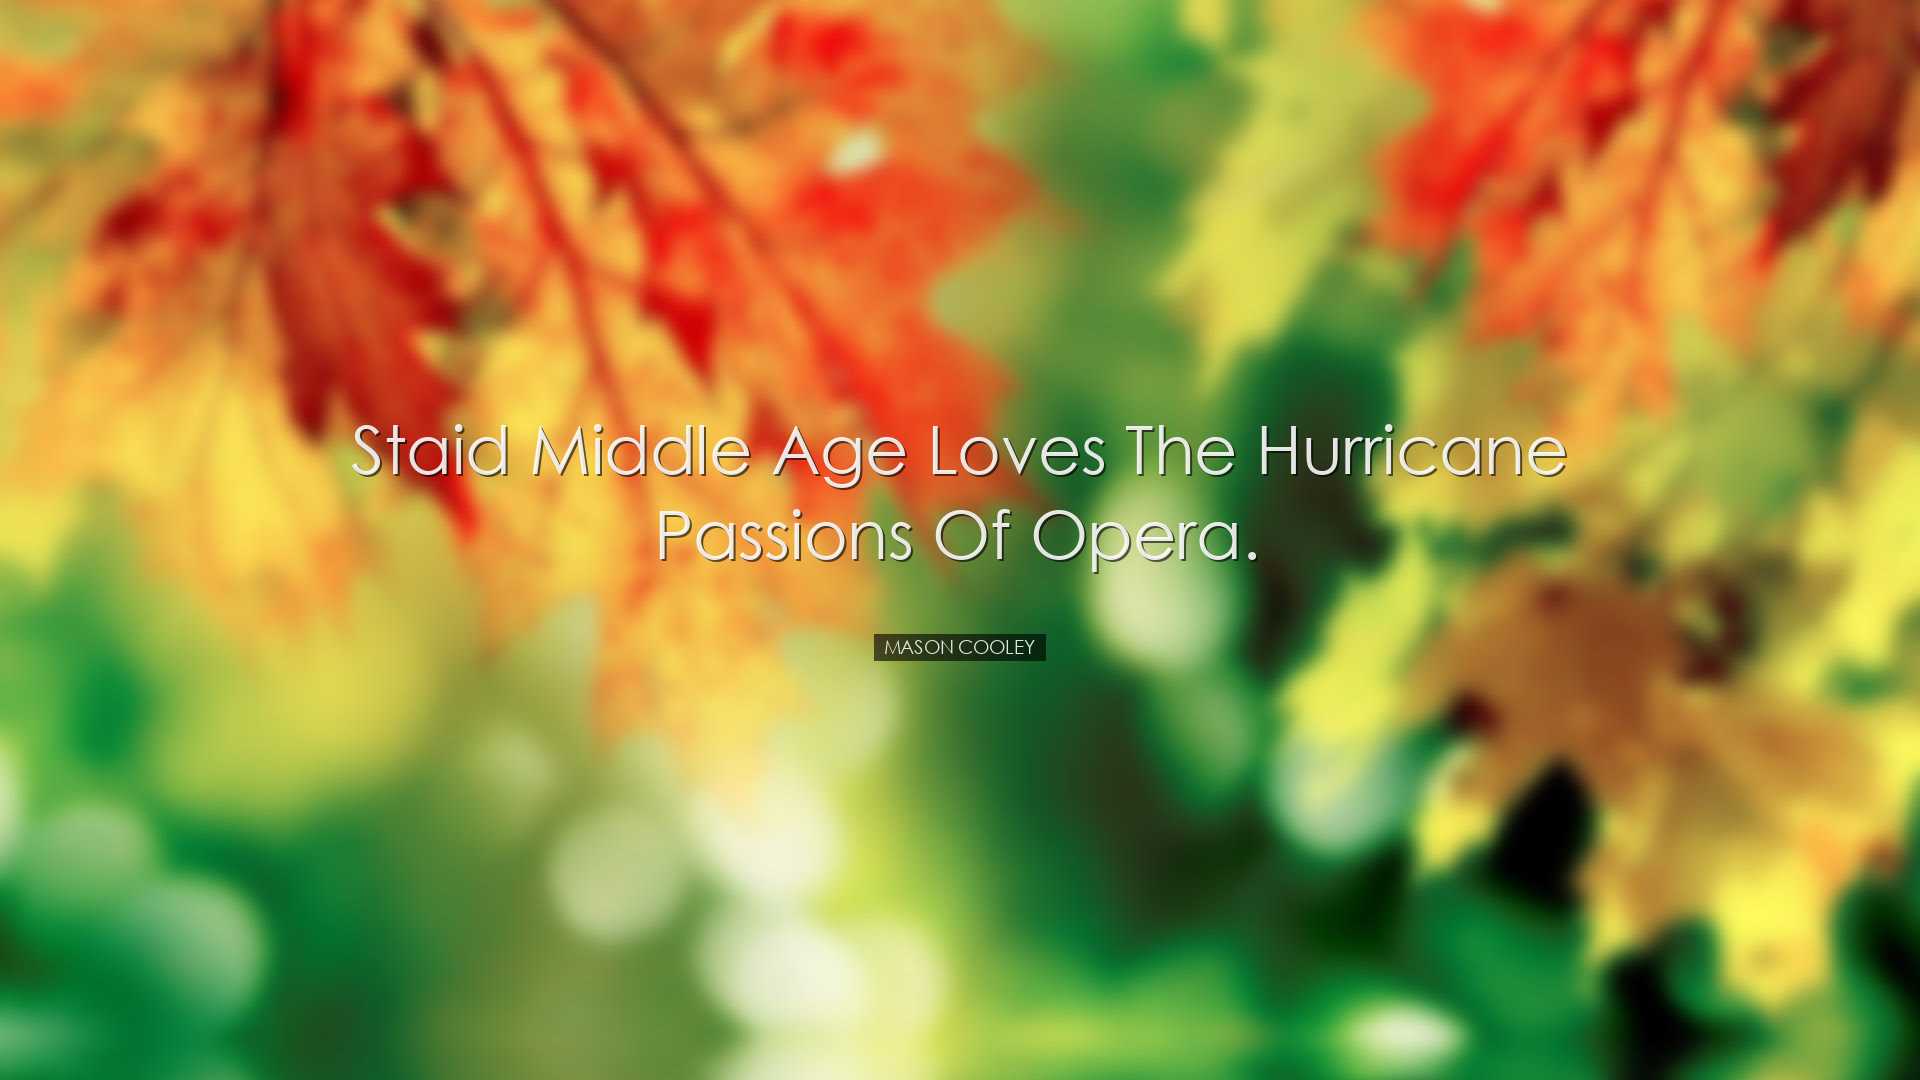 Staid middle age loves the hurricane passions of opera. - Mason Co